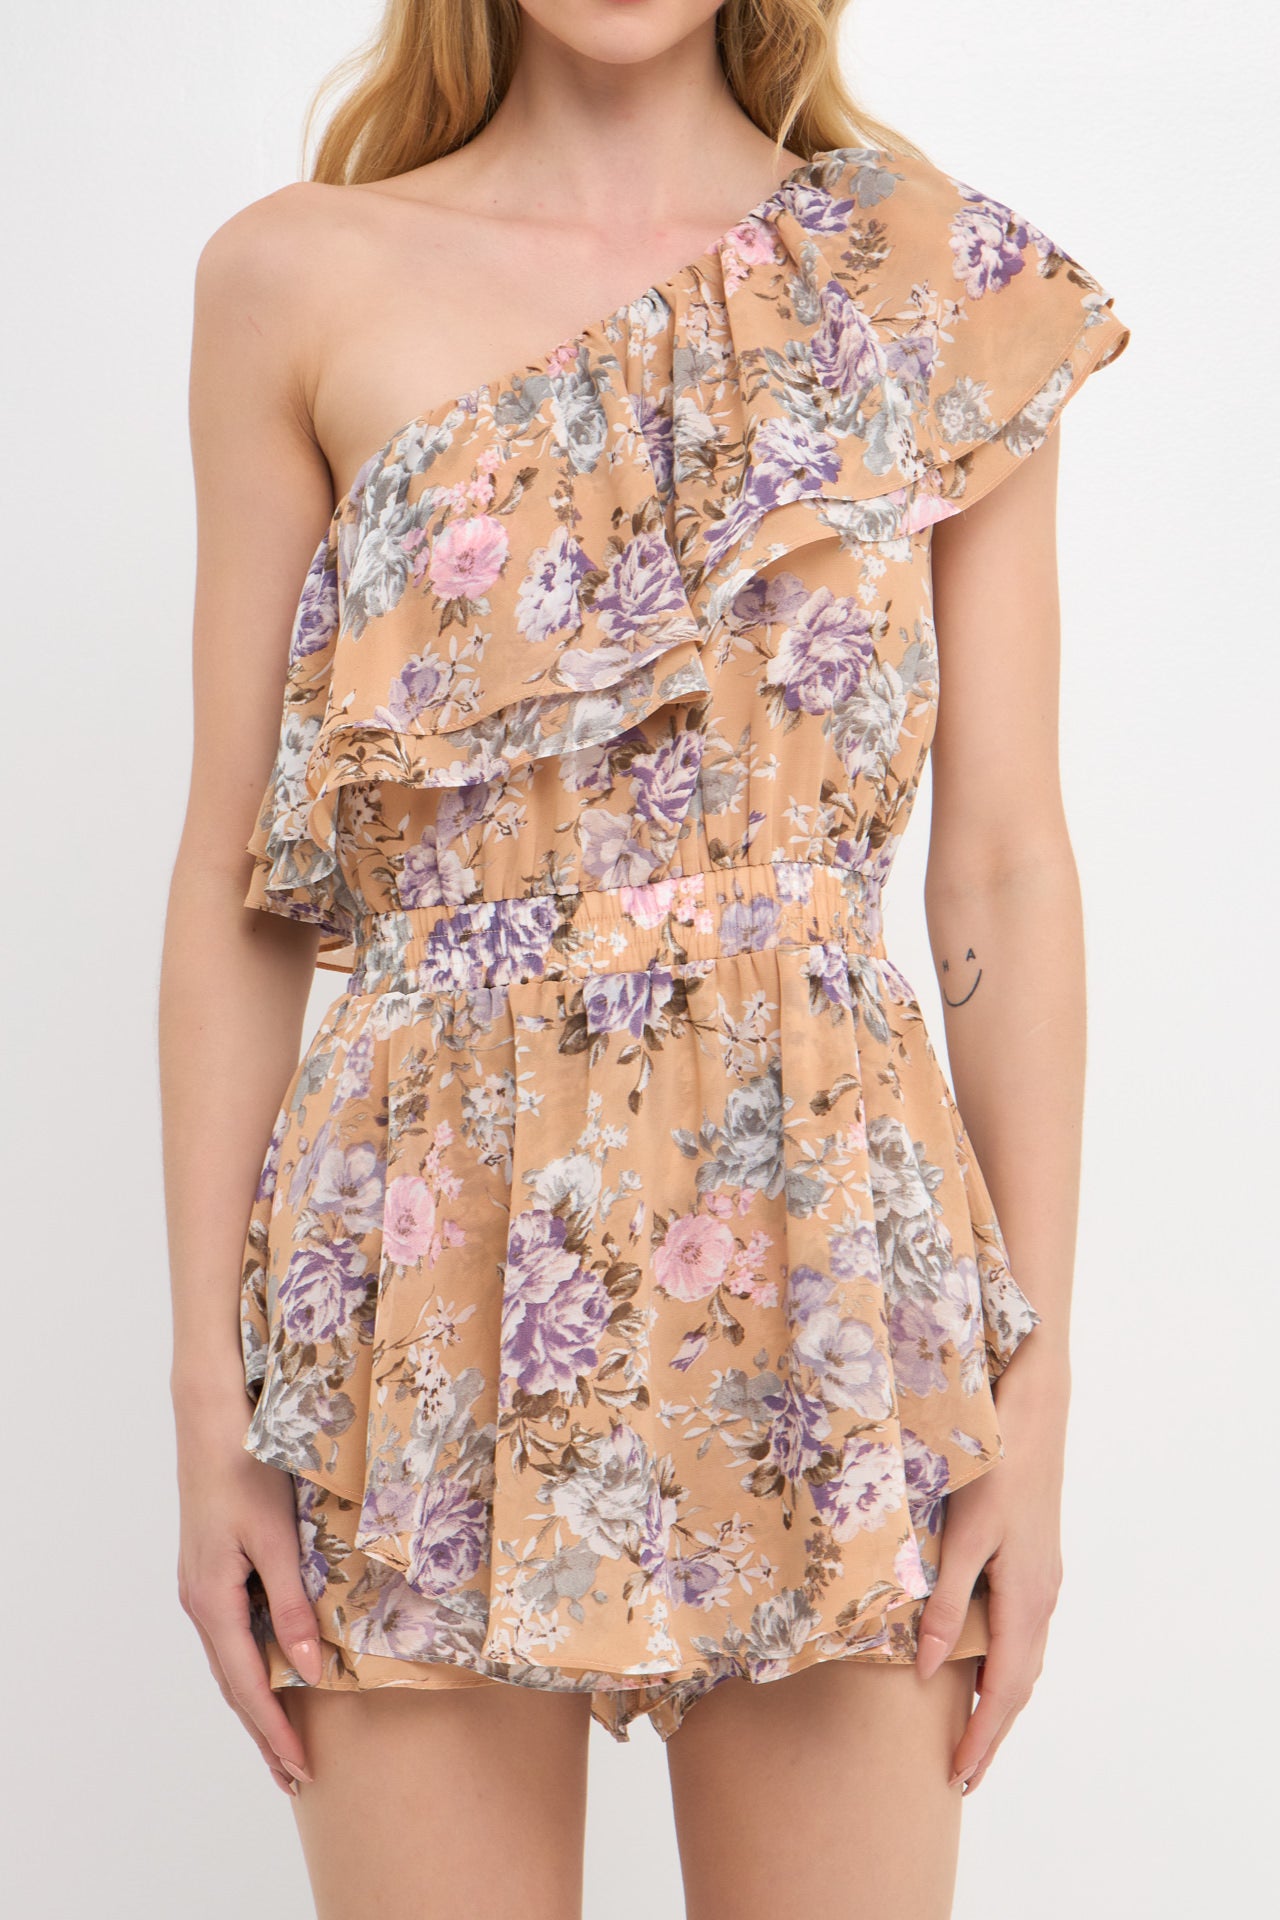 FREE THE ROSES - Floral One Shoulder Romper - ROMPERS available at Objectrare